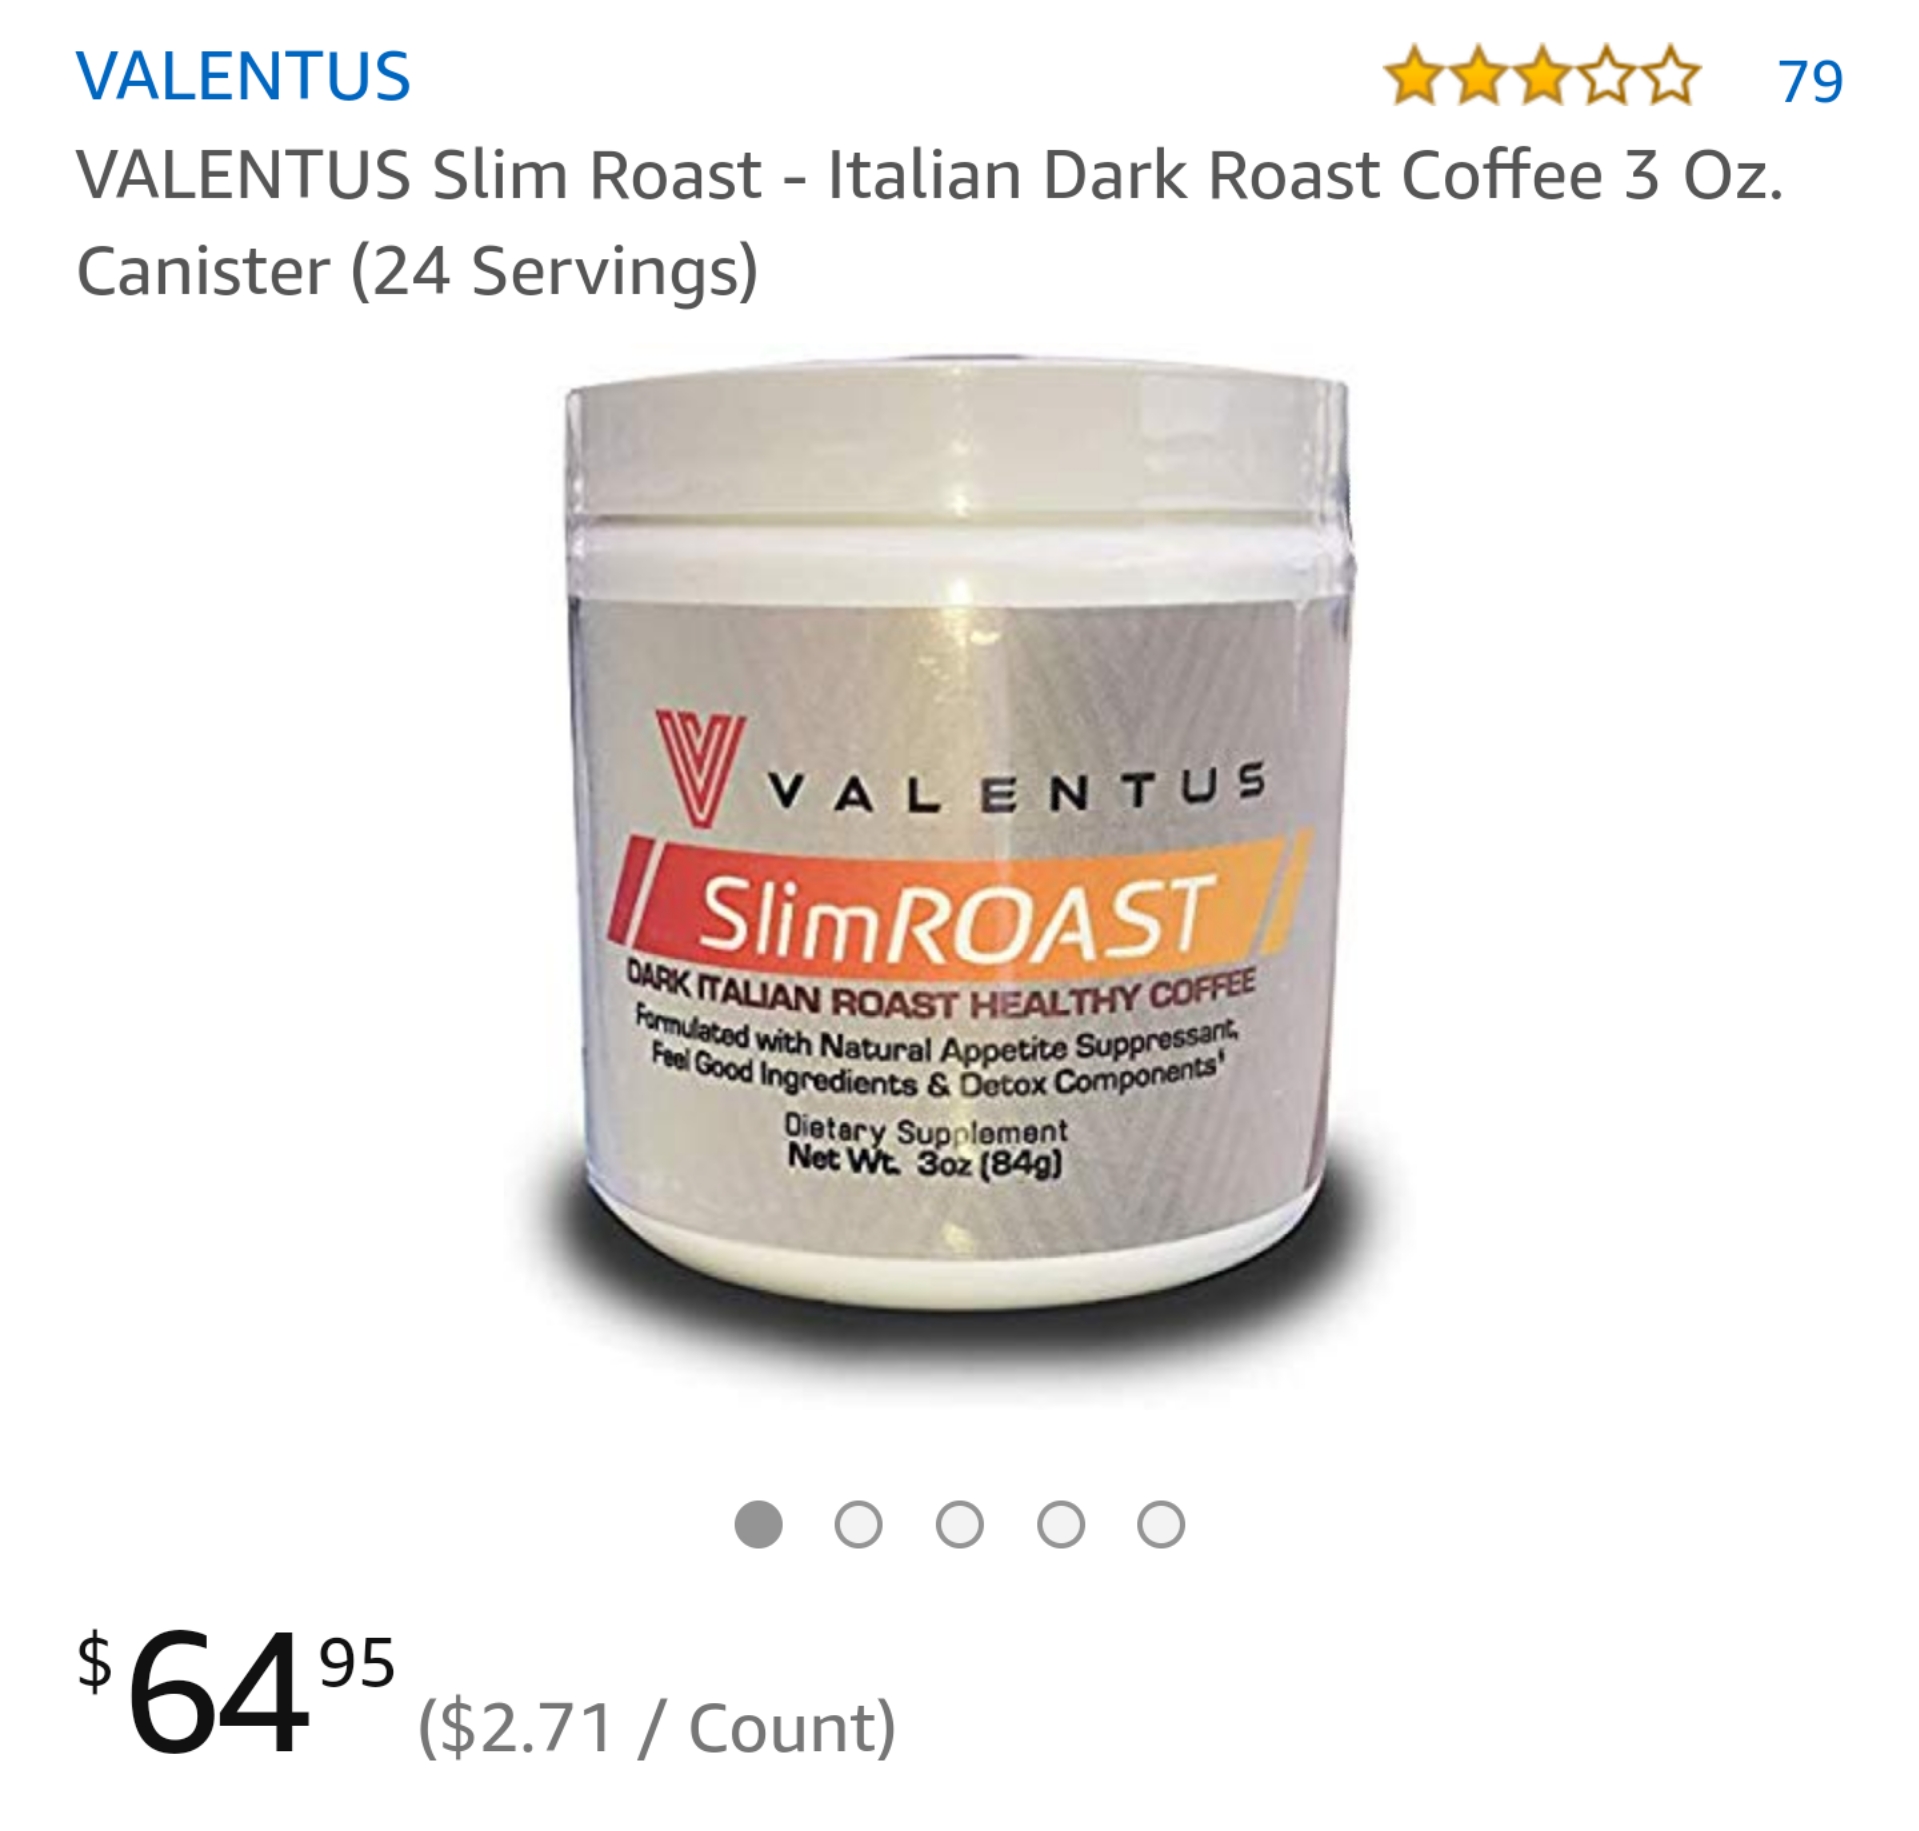 Valentus Review - Amazon Listing For SlimRoast